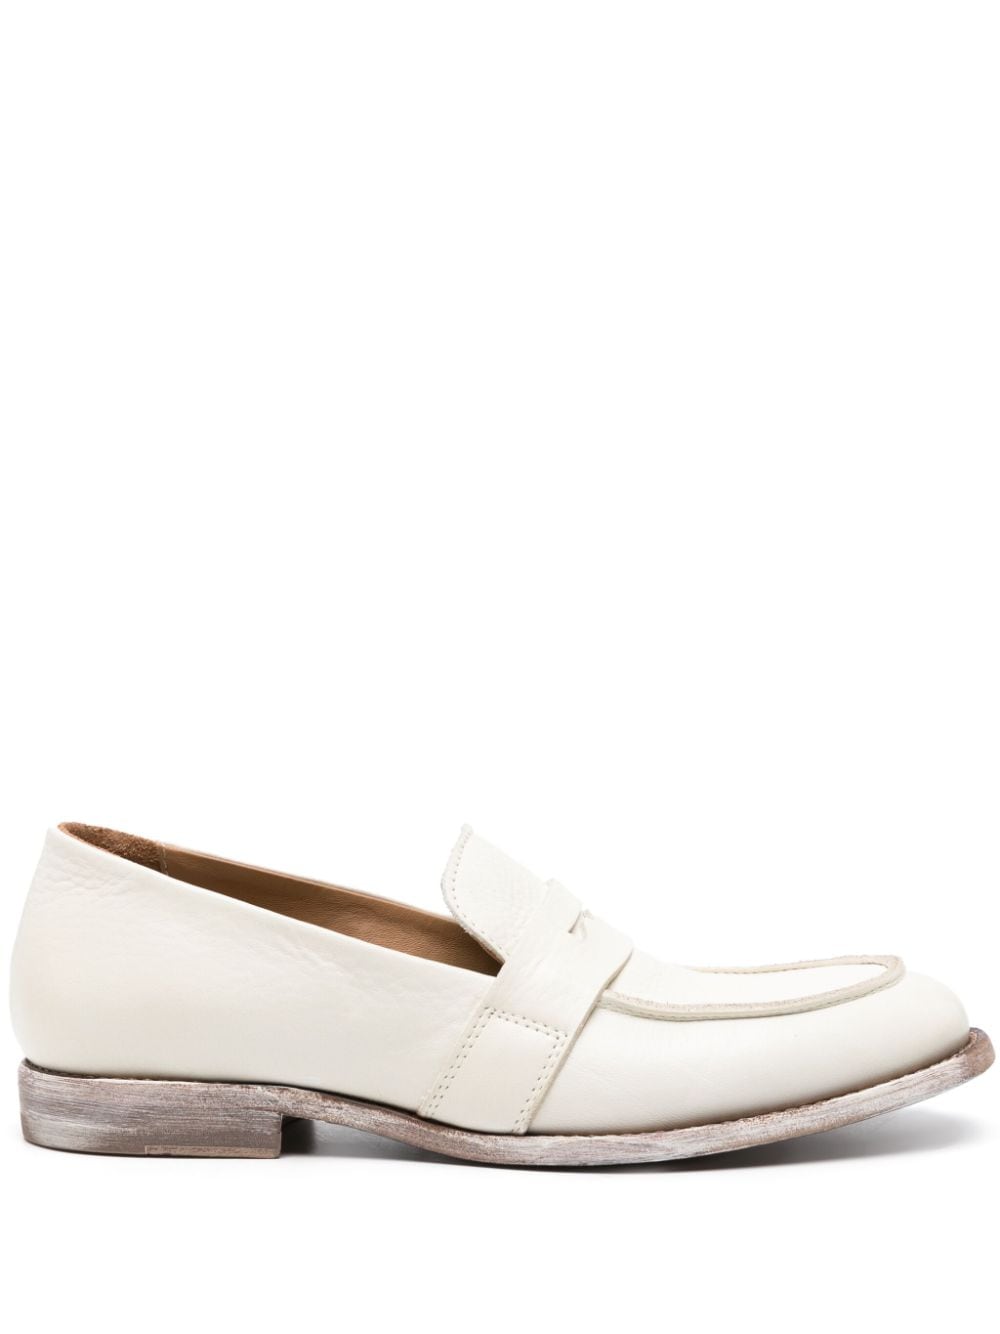 Moma leather penny loafers - White von Moma